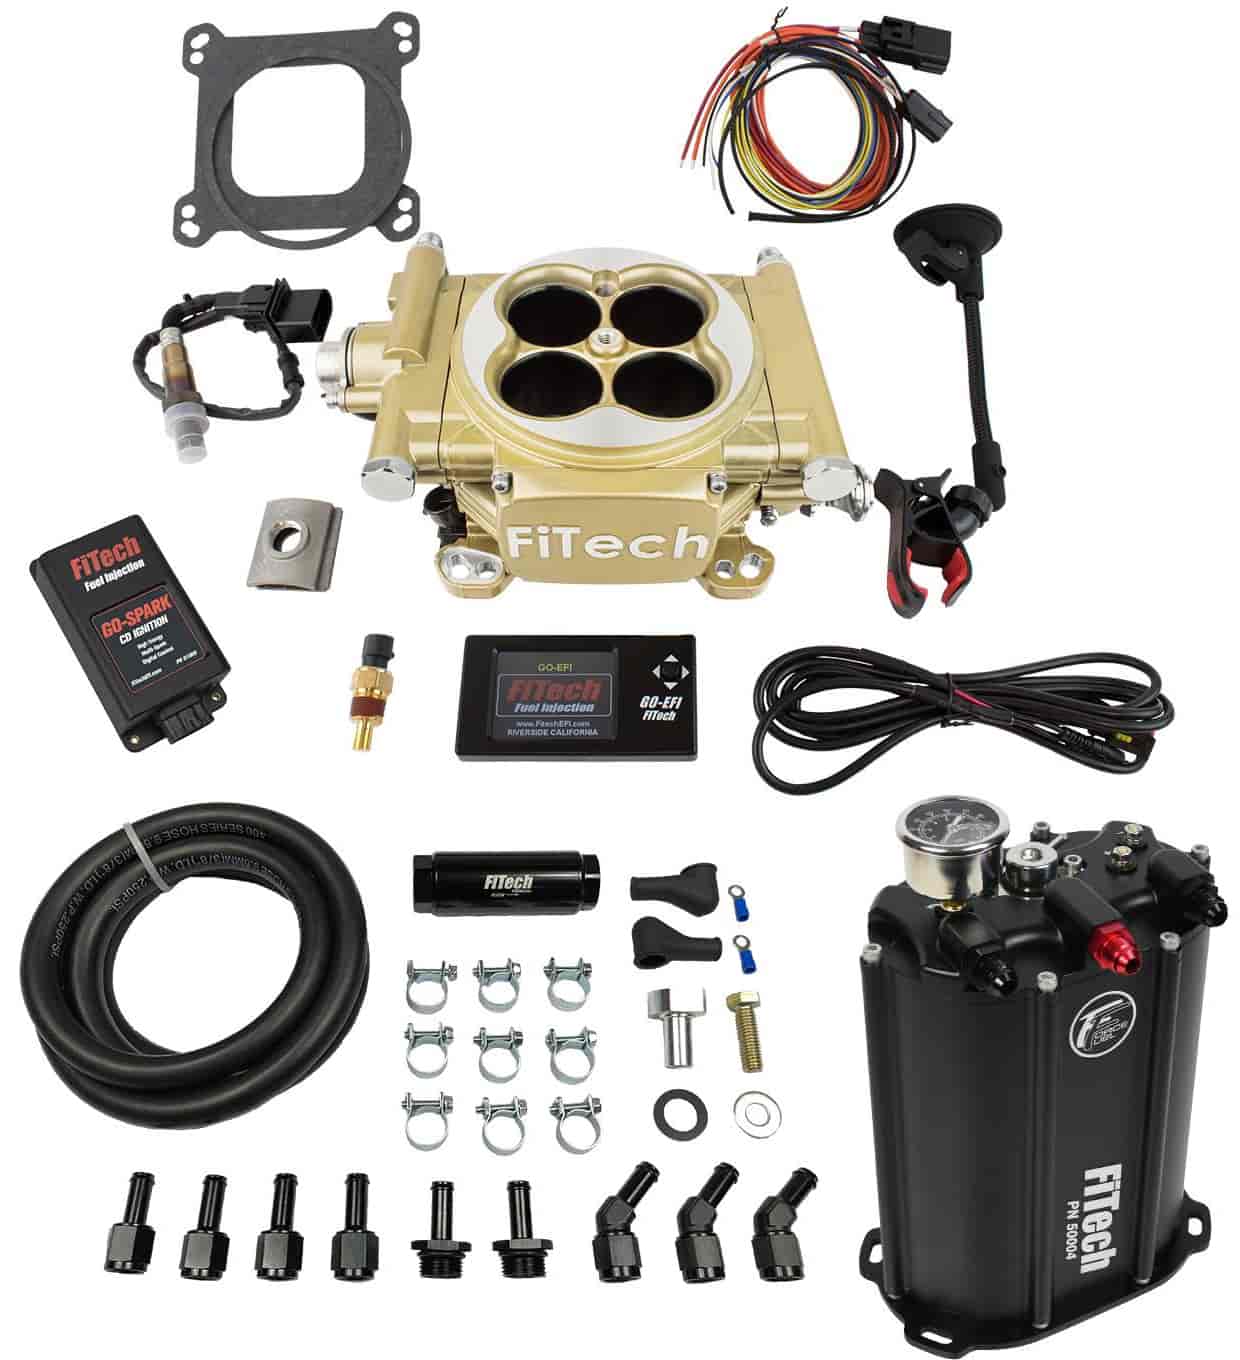 Easy Street EFI 600 HP Throttle Body Fuel Injection Master Kit [with Force Fuel System & CDI Box] Classic Gold